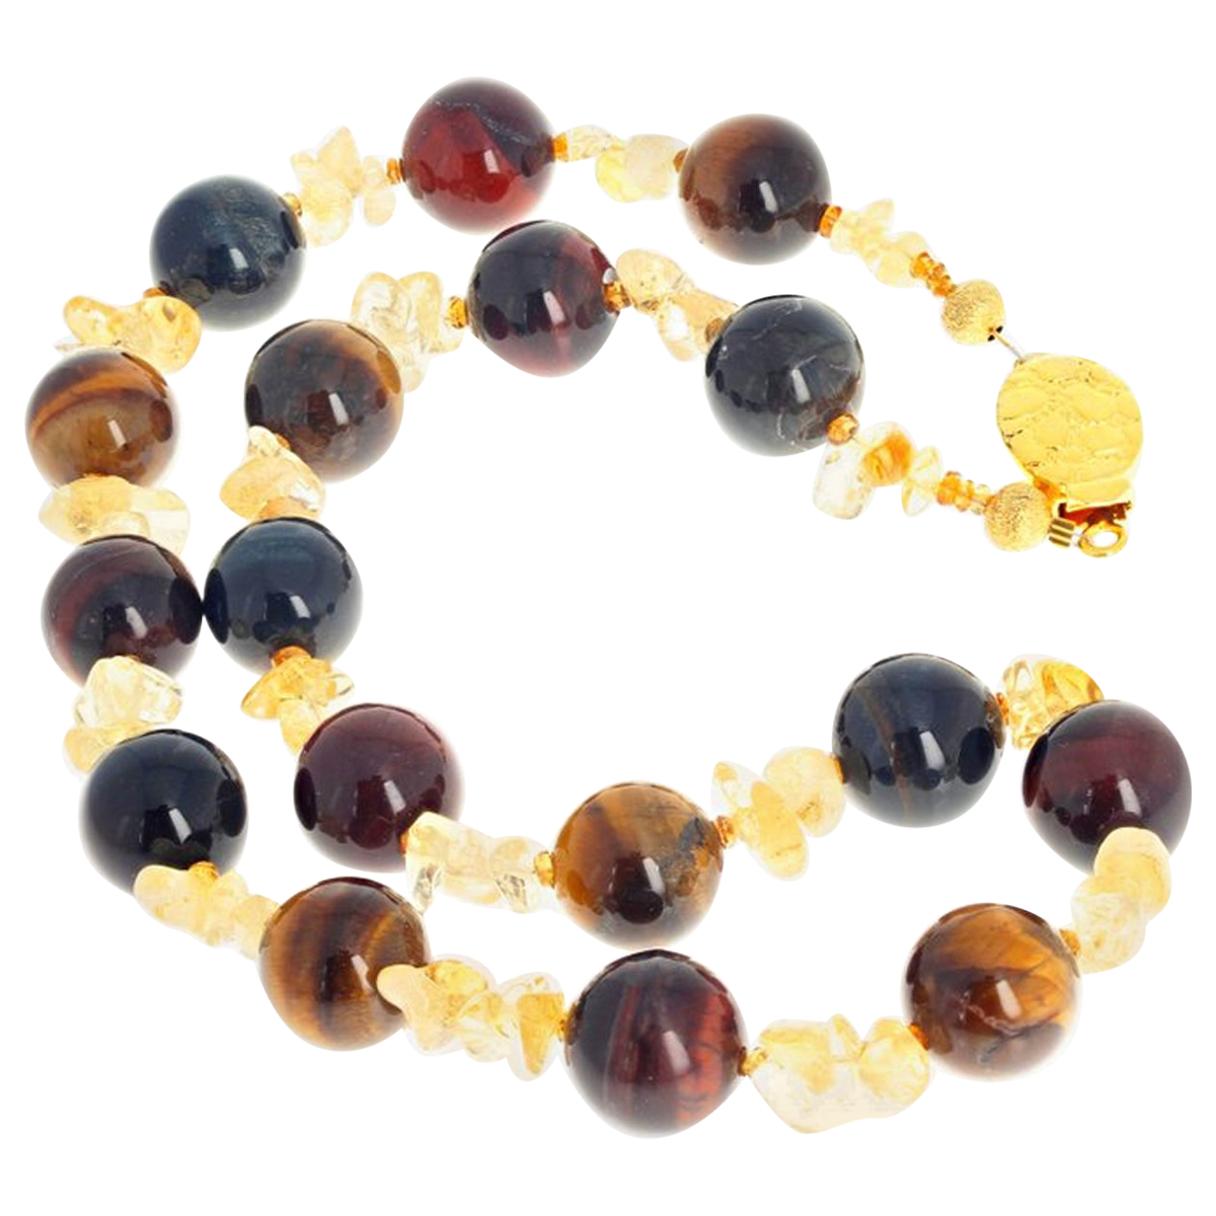 These beautiful highly polished 14 mm round TigerEye gems are enhanced with polished natural chunks of yellow Citrine and accented with tiny gem cut sparkling little Citrine gemstones. The Necklace is 19 inches long and the clasp is gold washed. 